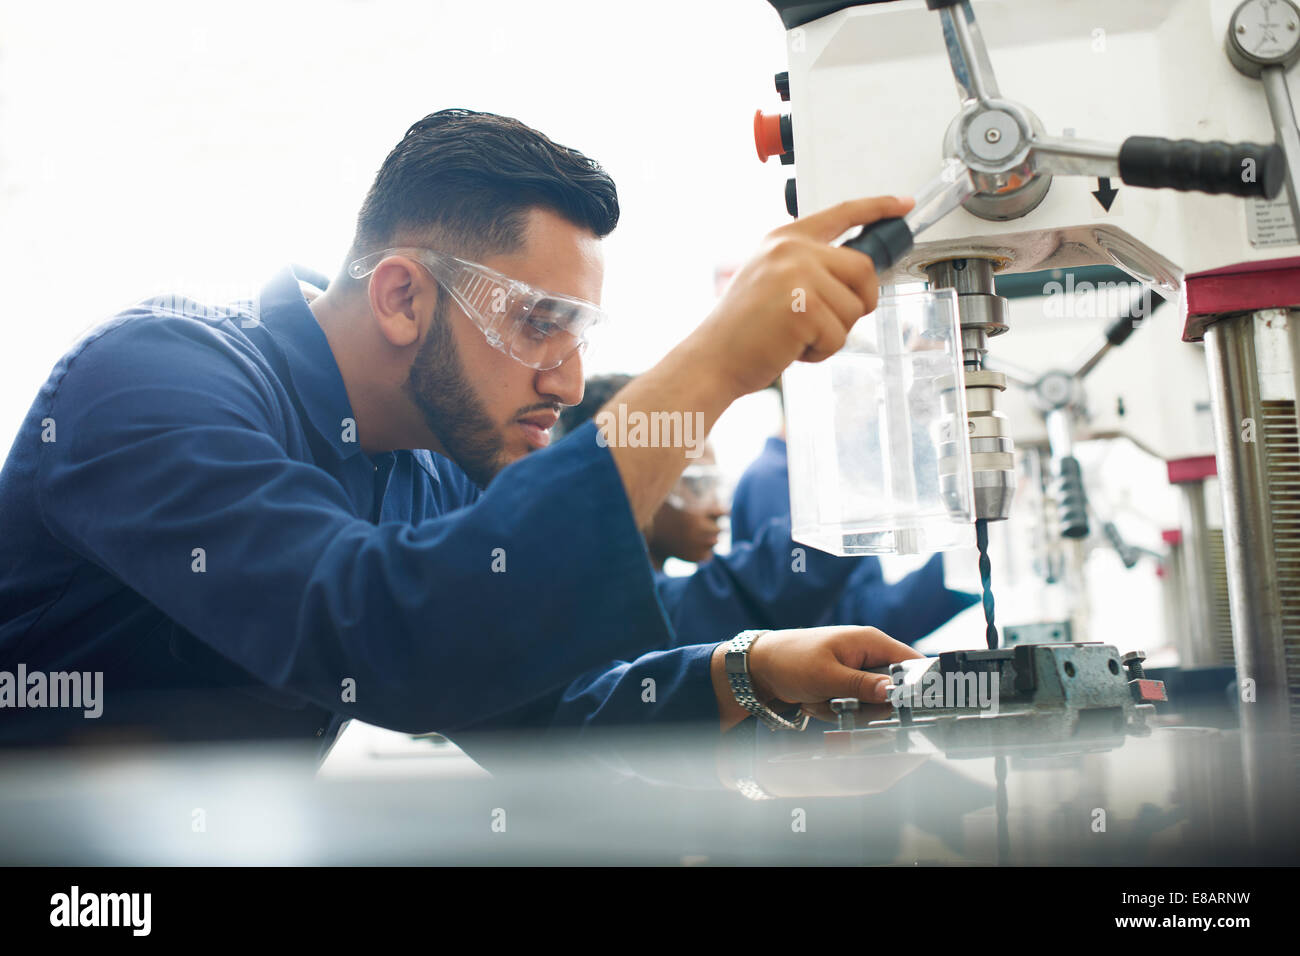 Male student using drilling machine in college workshop Stock Photo